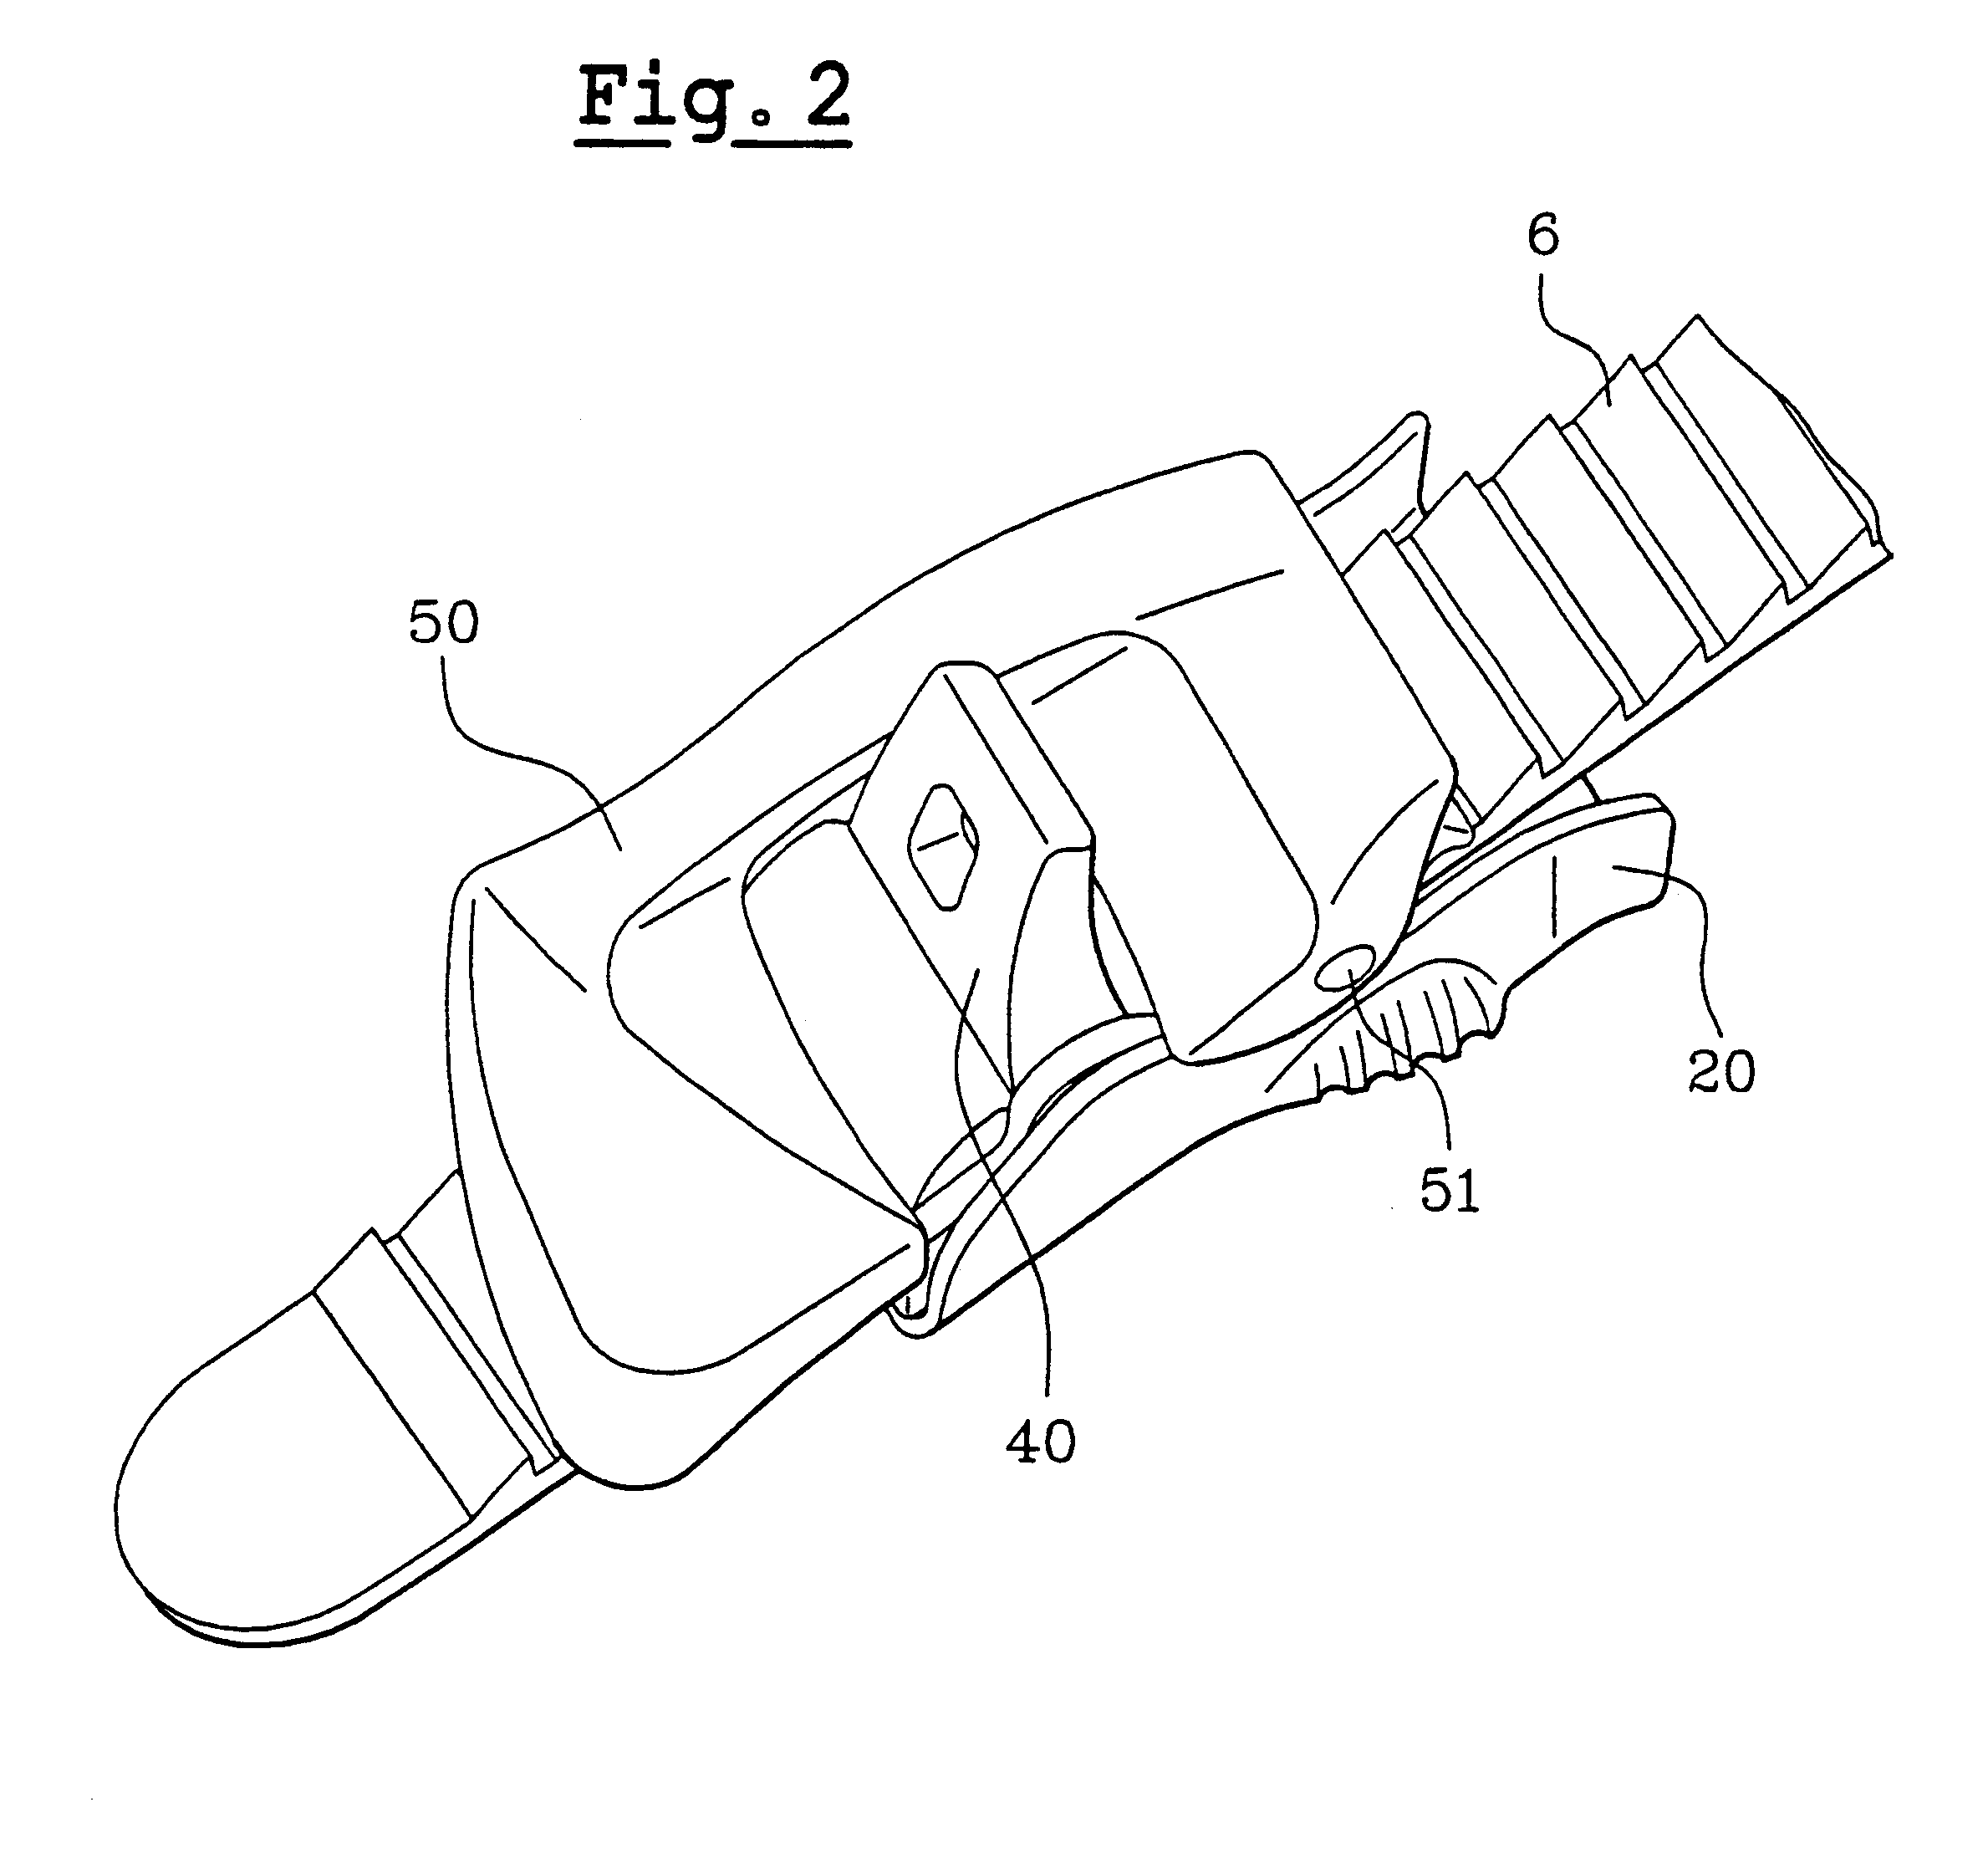 Device for clamping together two parts of a sports article